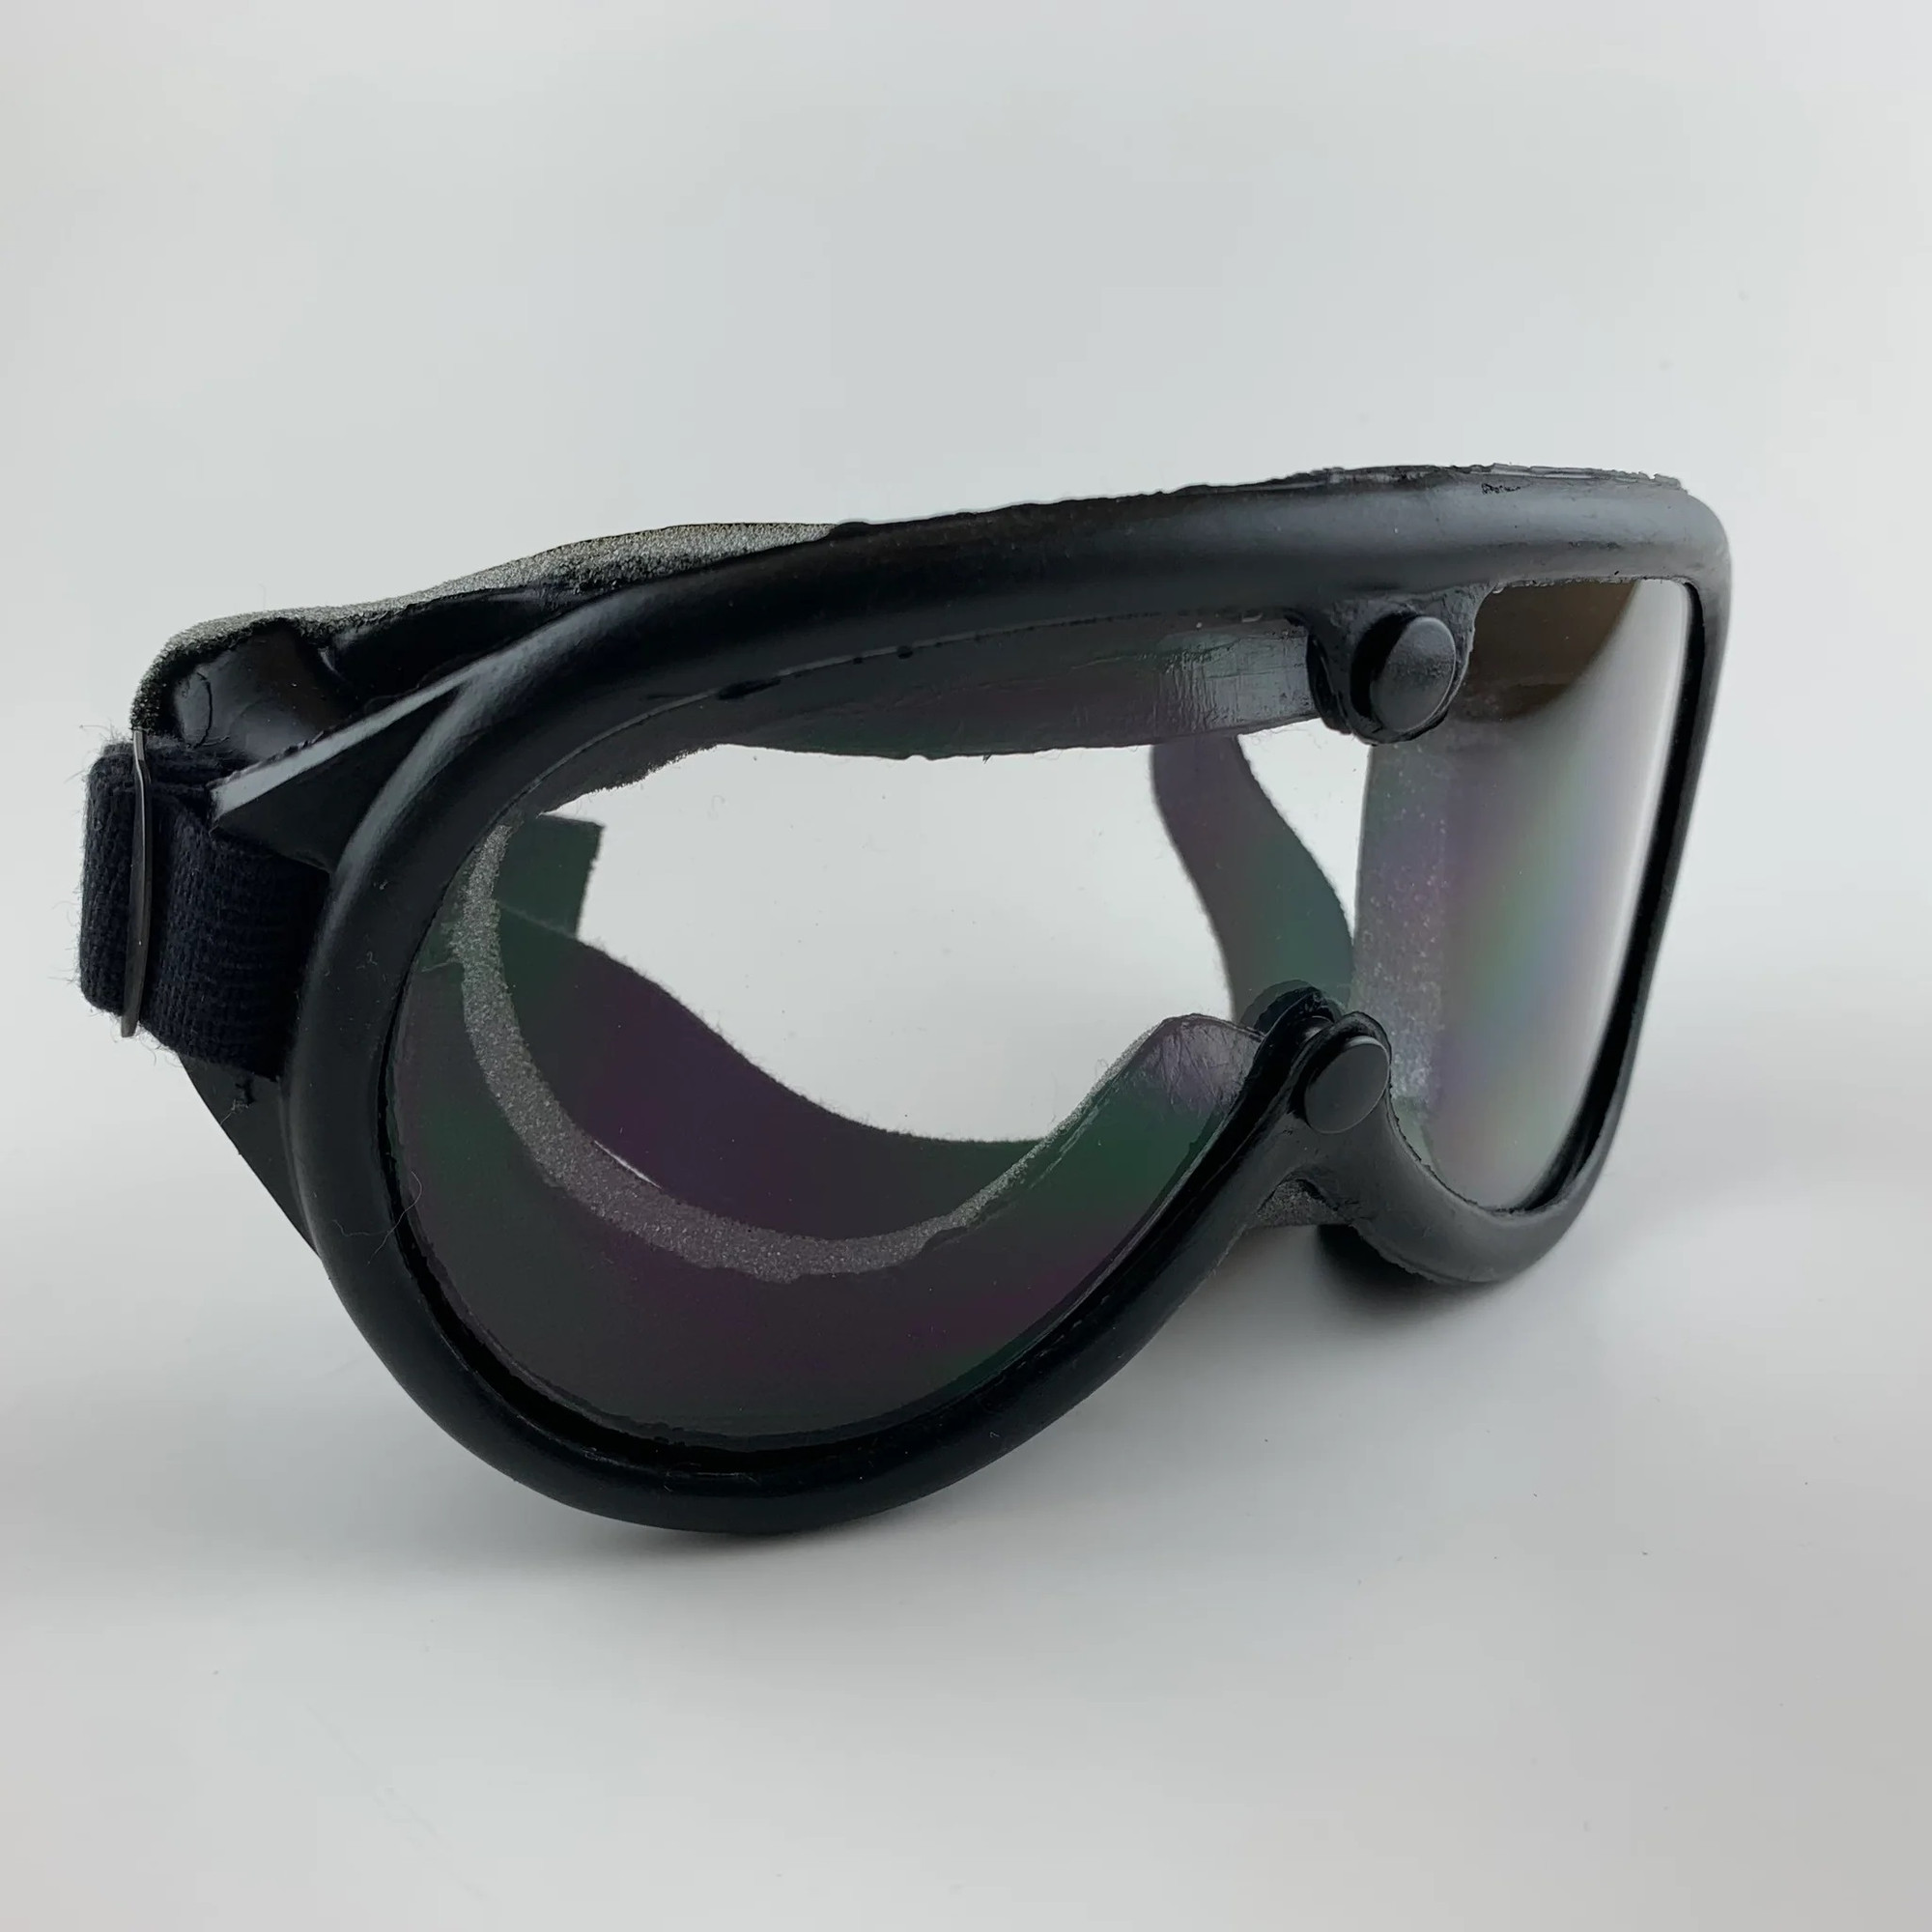 Canadian Armed Forces Sun, Wind & Dust Goggles w/ Extra Lens